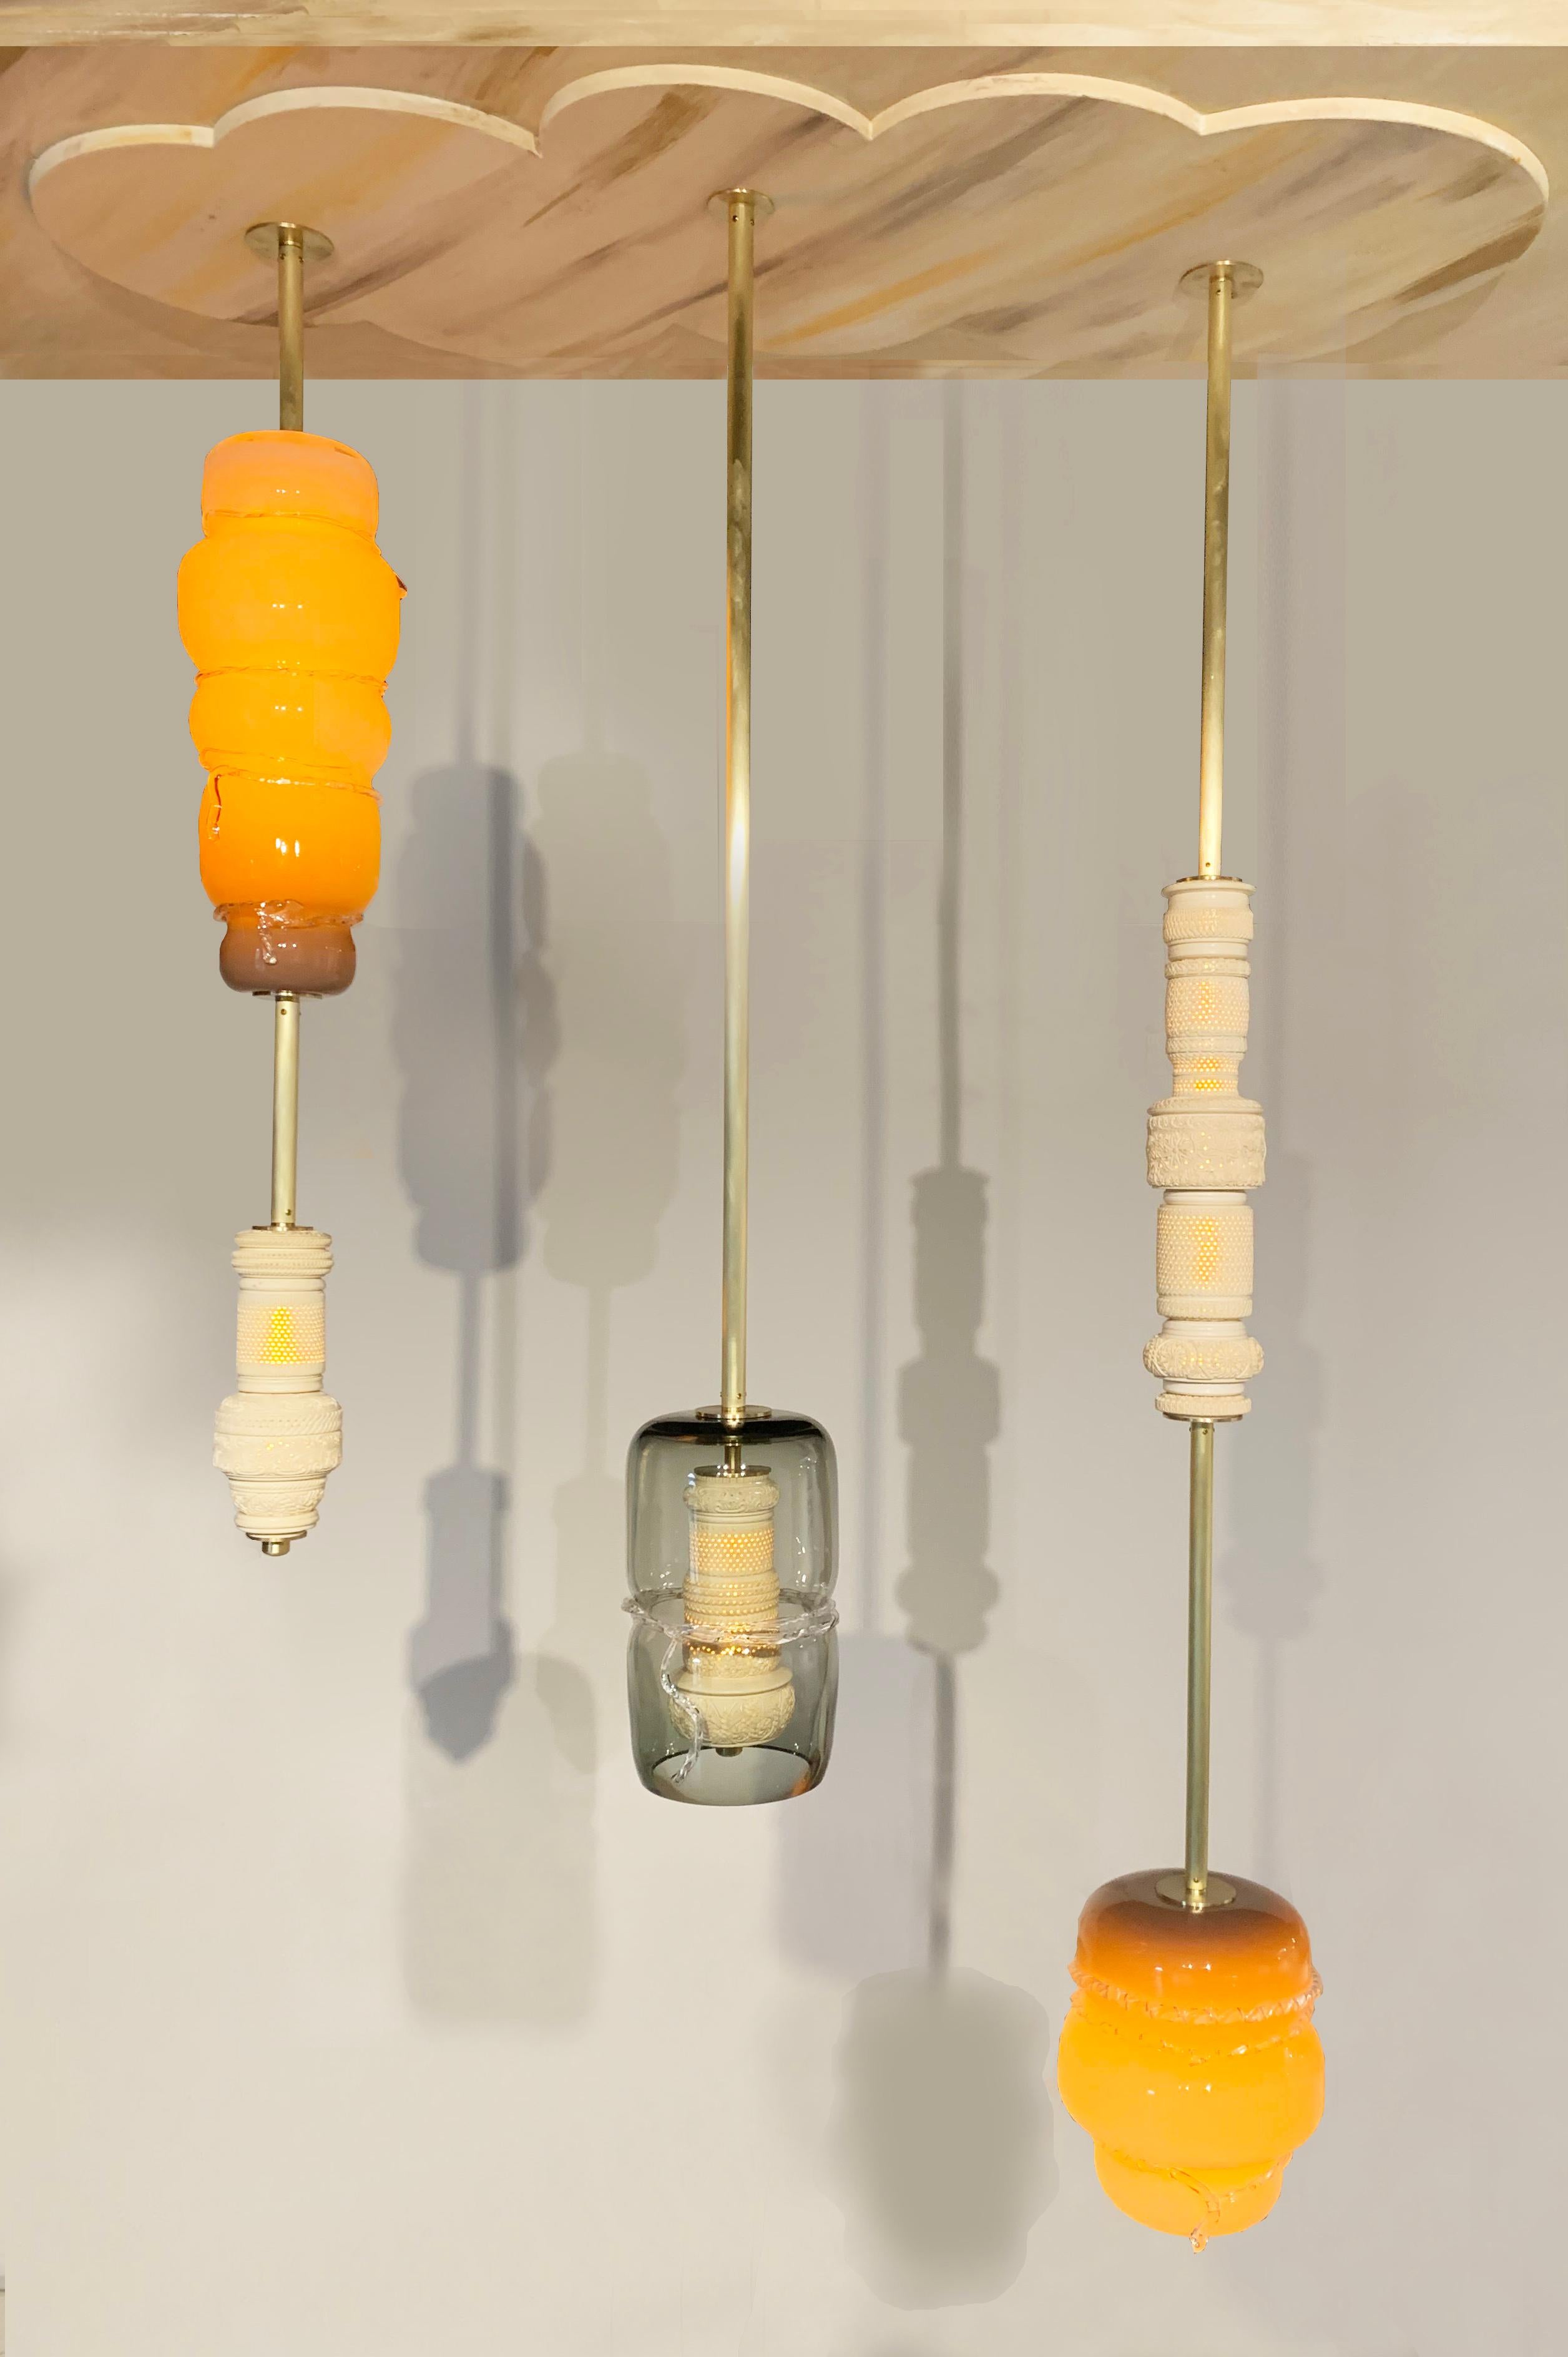 Feyza Kemahlioglu
Woven Colony, 2019
Meershaum, blown glass, brass, wood and LEDs
Pendant 1: 30 x 7 x 7 in
Pendant 2: 44 x 10 x 10 in
Pendant 3: 48 x 14 x 14 in

Created by Feyza Kemahlioglu of FEYZ Studio, this chandelier of three pendants is